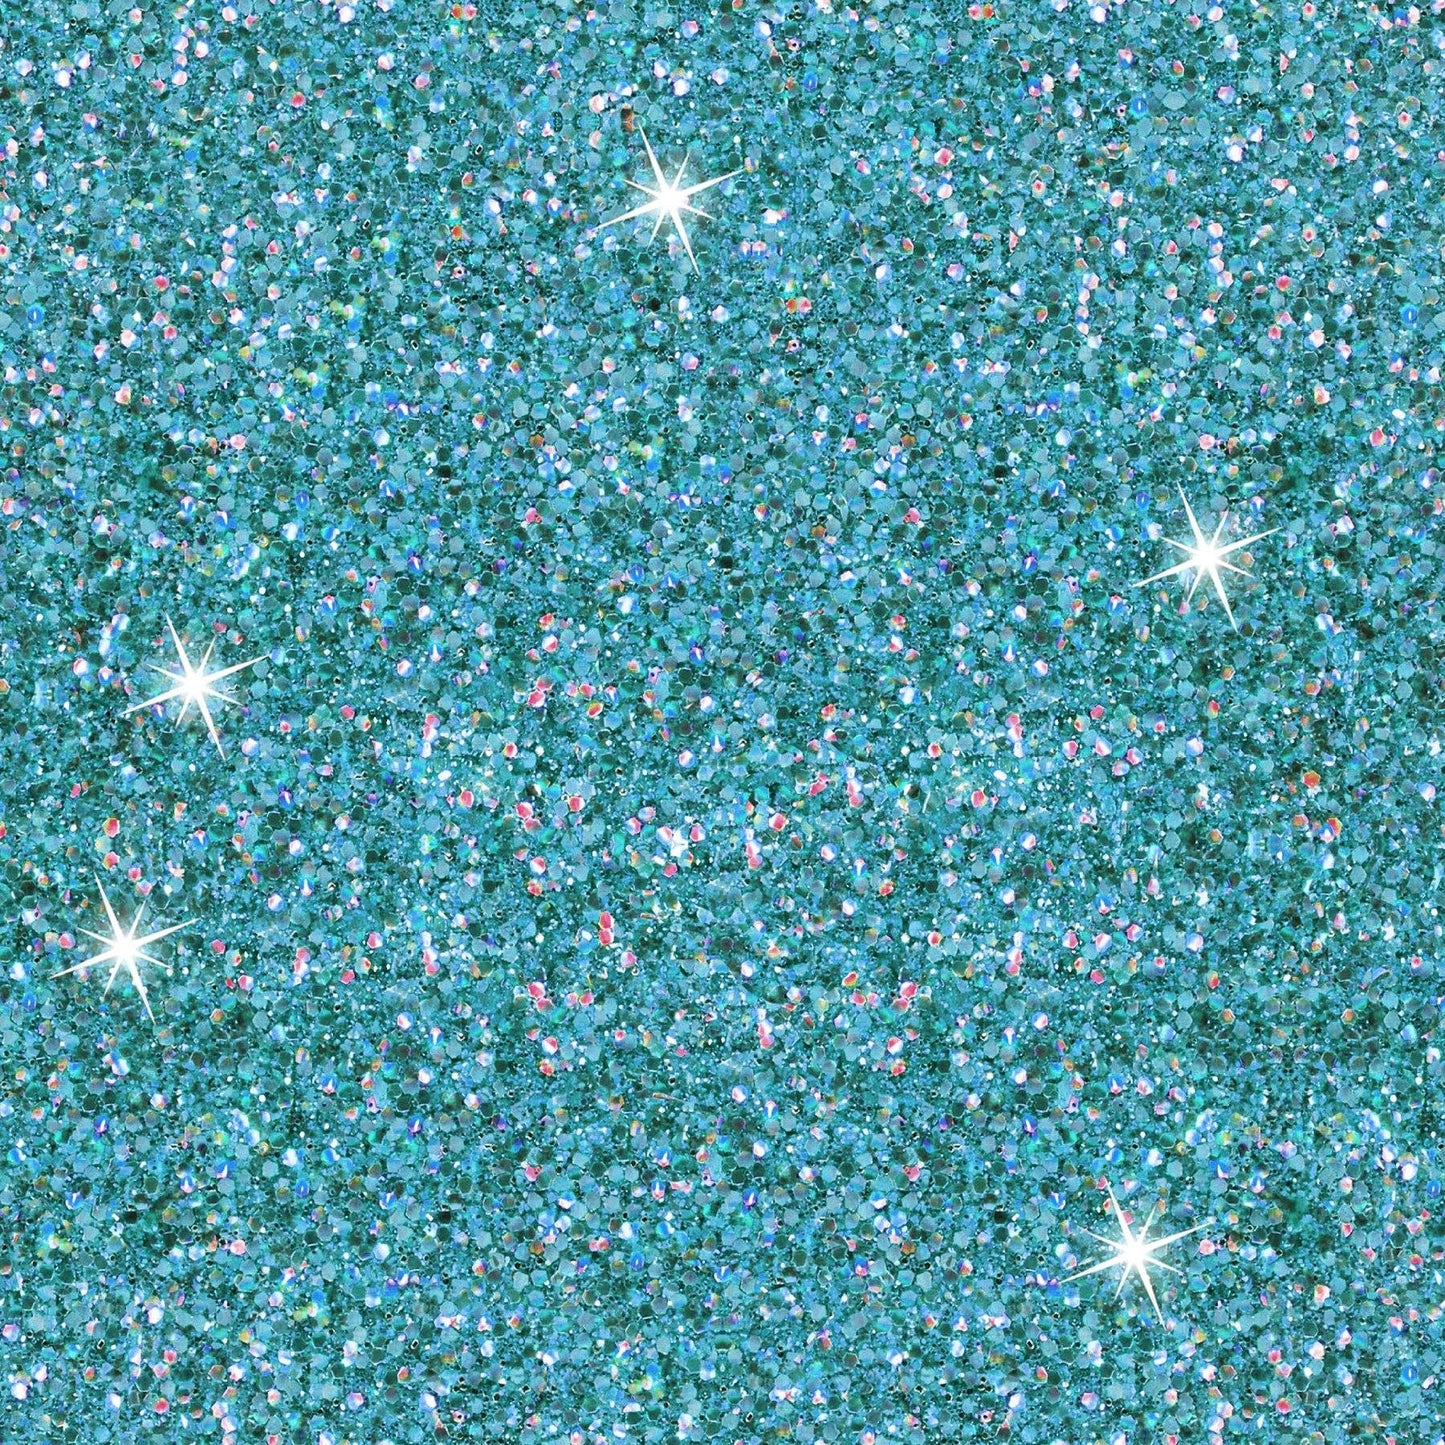 Preorder R33- Mermagical - Coordinate-Sparkly Blue Glitter